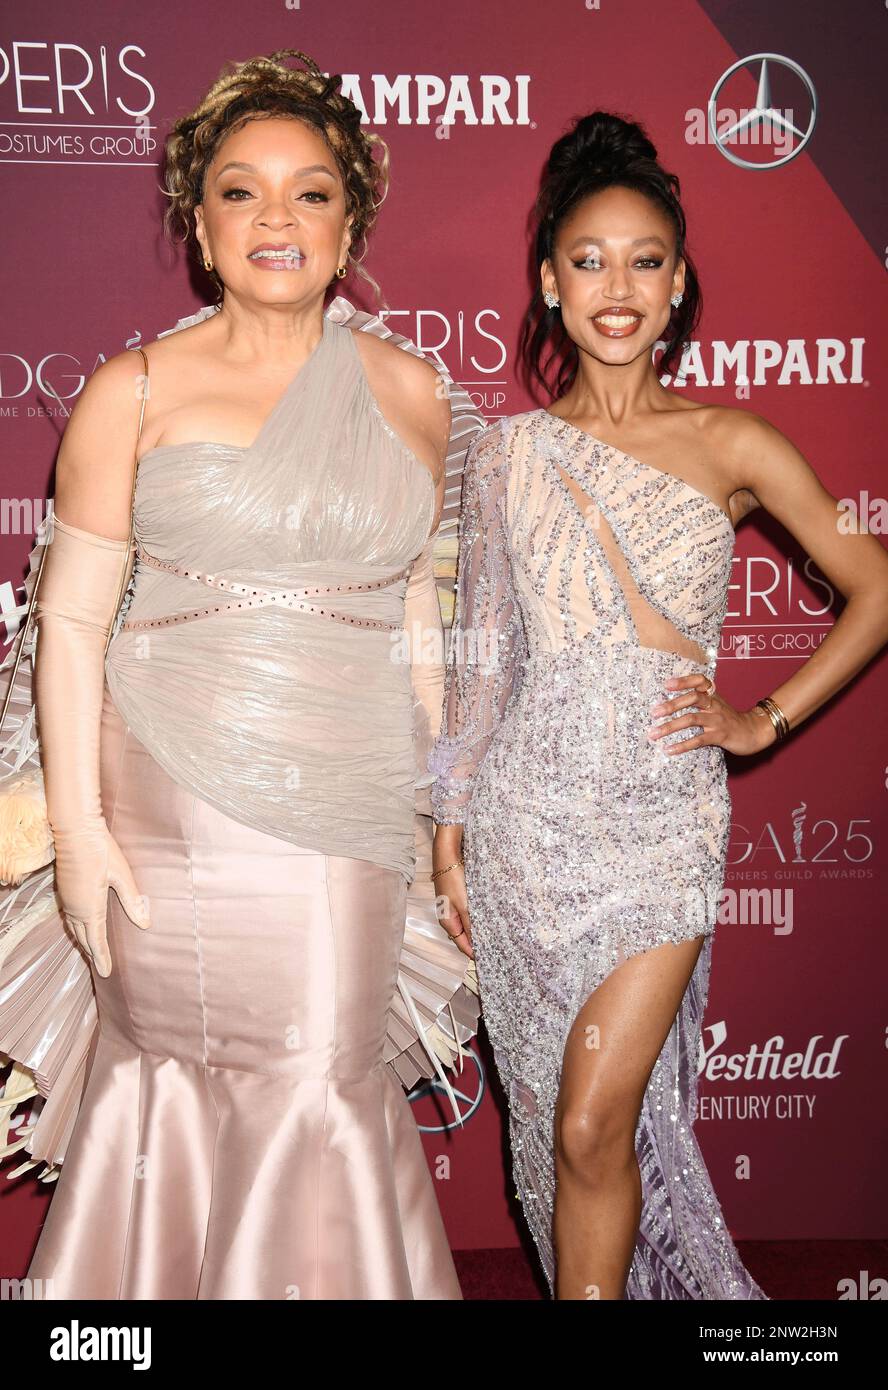 LOS ANGELES, CALIFORNIA - FEBRUARY 27: (L-R) Ruth E. Carter and D'on Lauren Edwards attend the 25th Annual Costume Designers Guild Awards at the Fairm Stock Photo